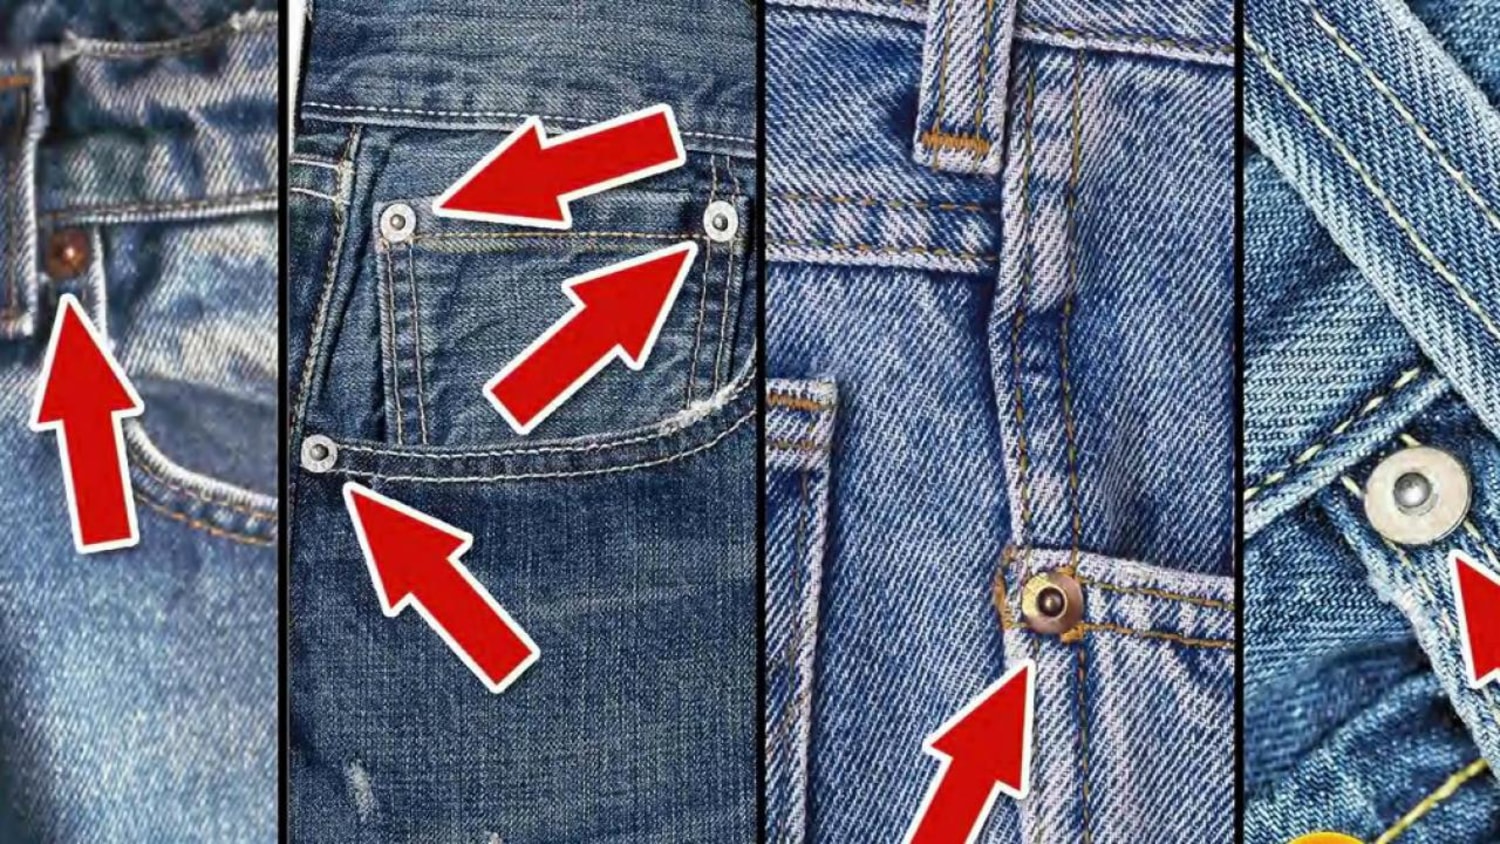 Men's and women's button-up shirts are on opposite sides for this reason